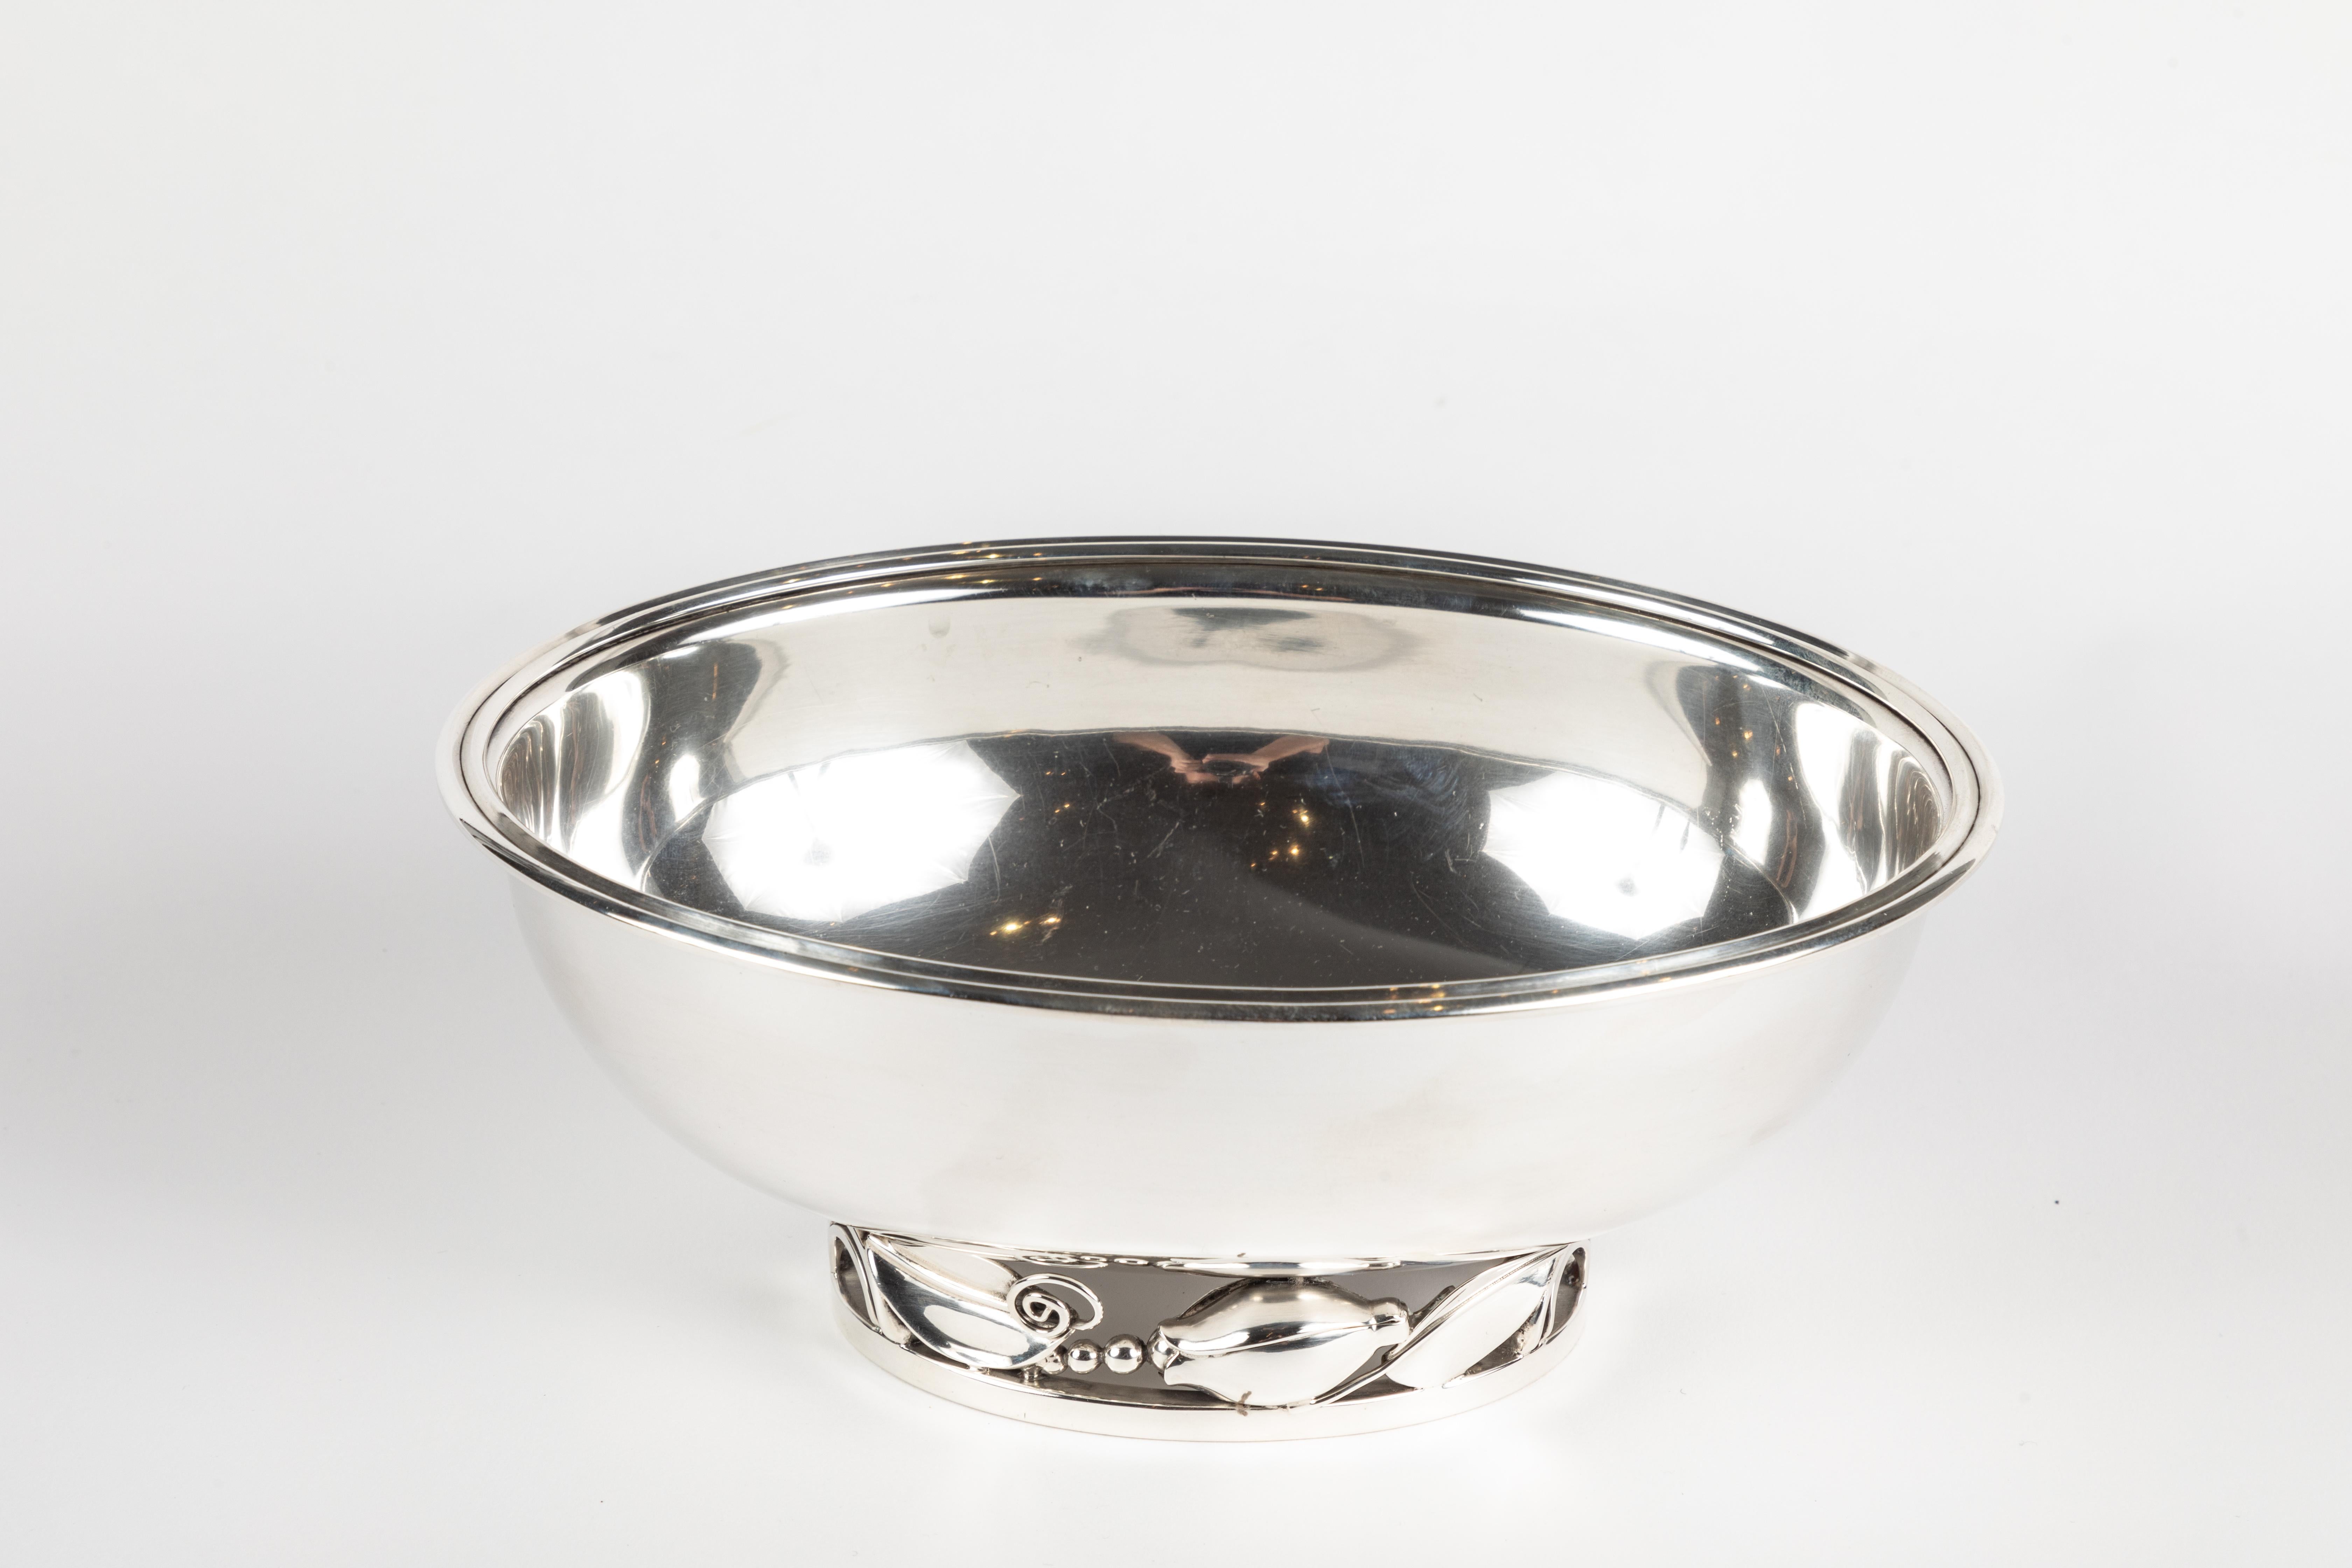 American Sterling Bowl by International Silver Designed by Alphonse LaPaglia